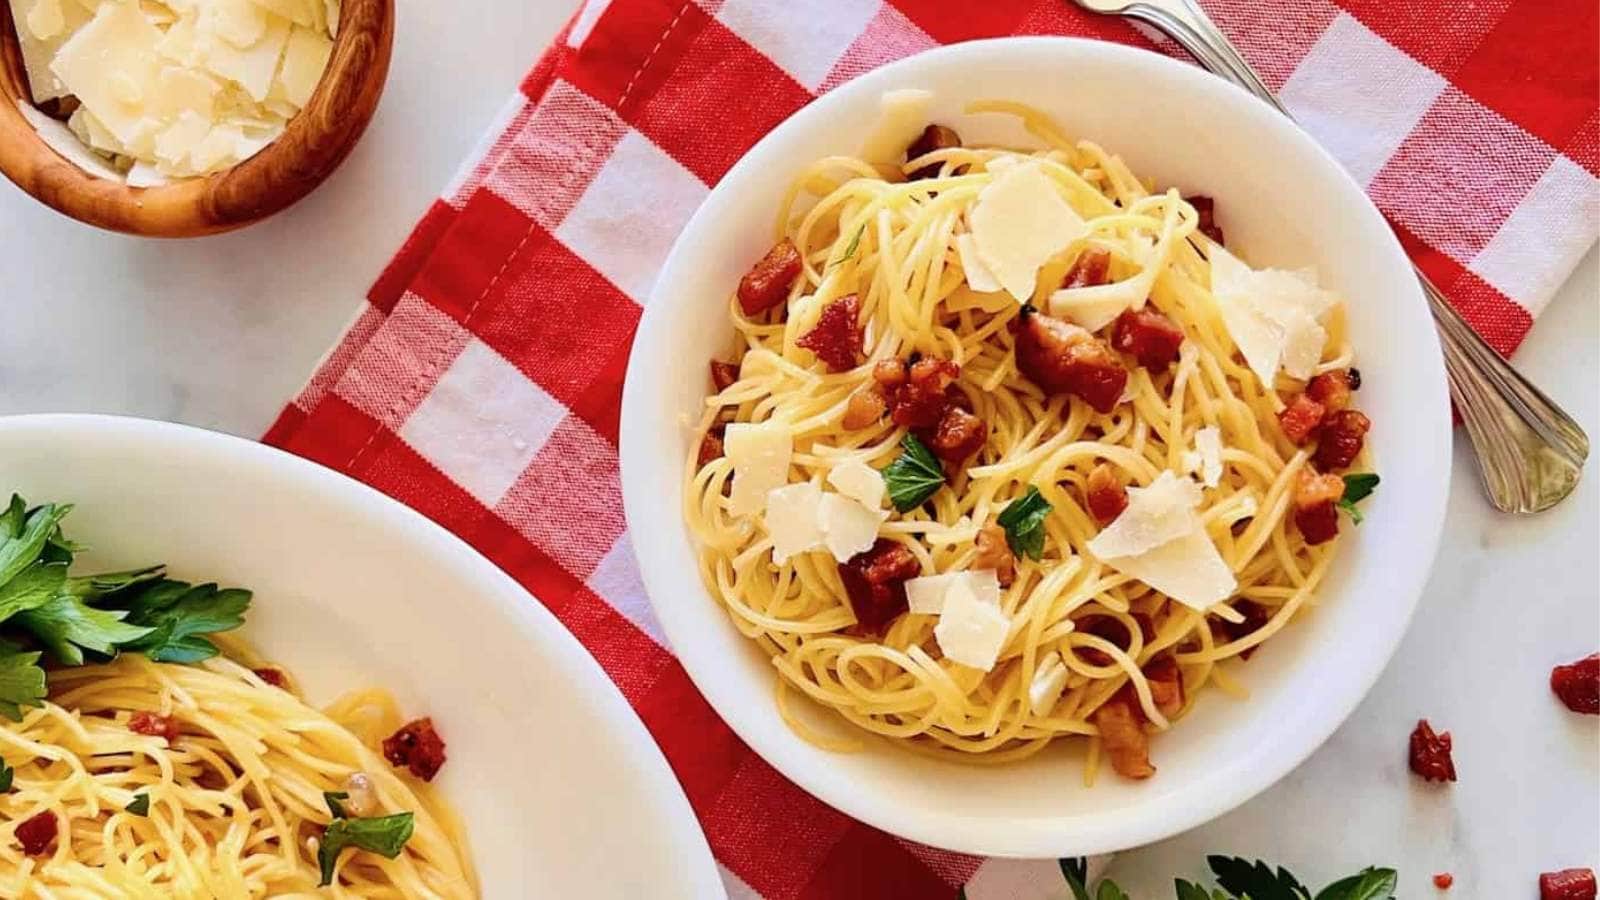 Pancetta Pasta recipe by The Short Order Cook.